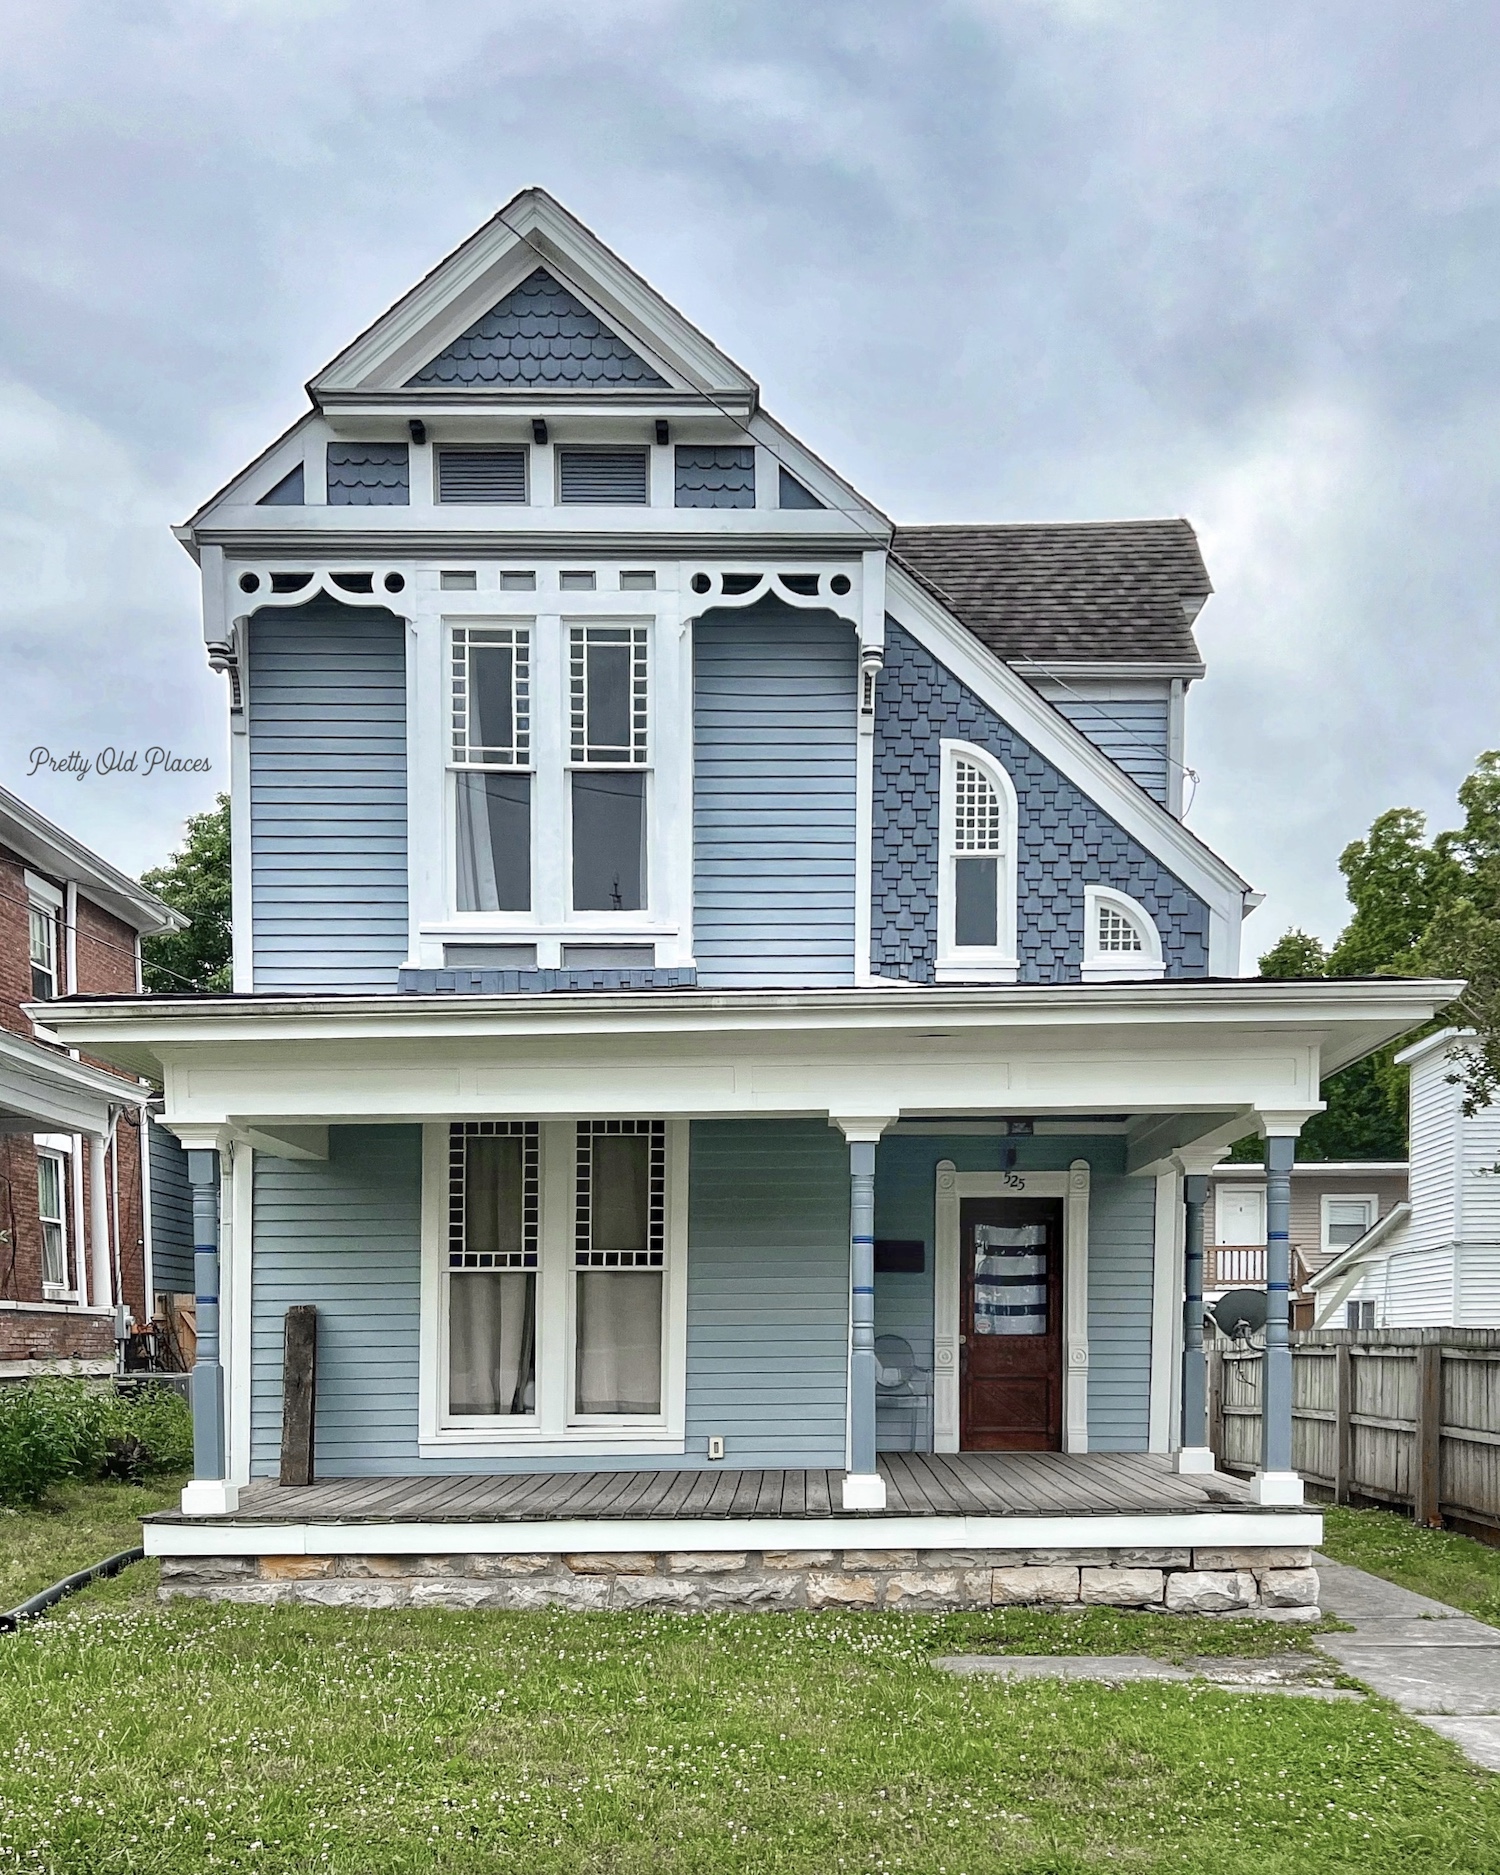 1895 Victorian in Bowling Green